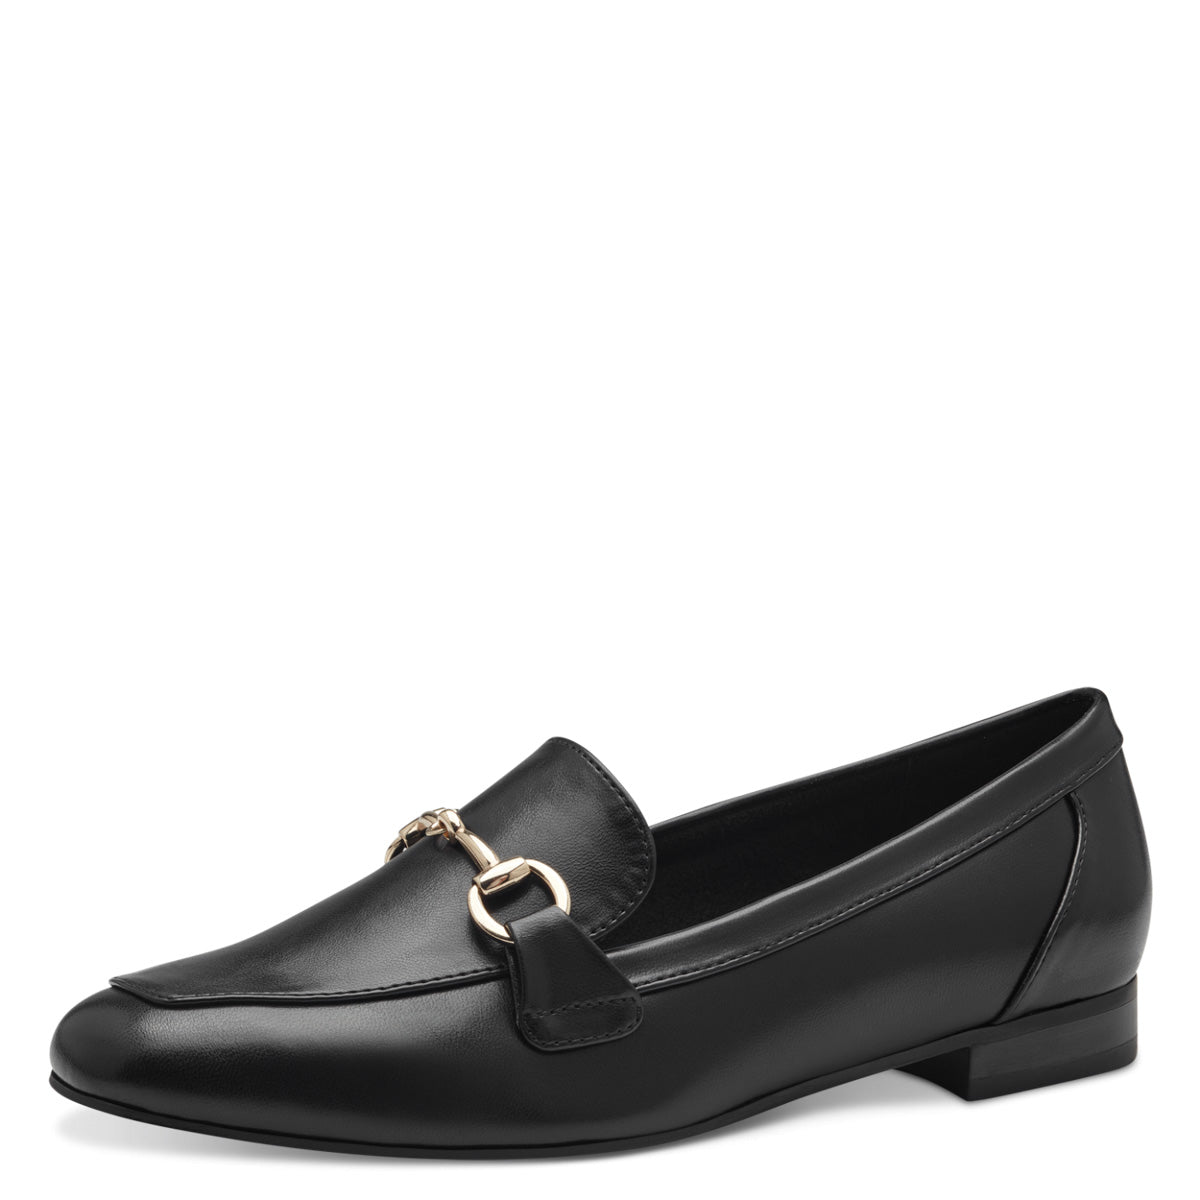 Front view of the Marco Tozzi Black Matte Loafer.